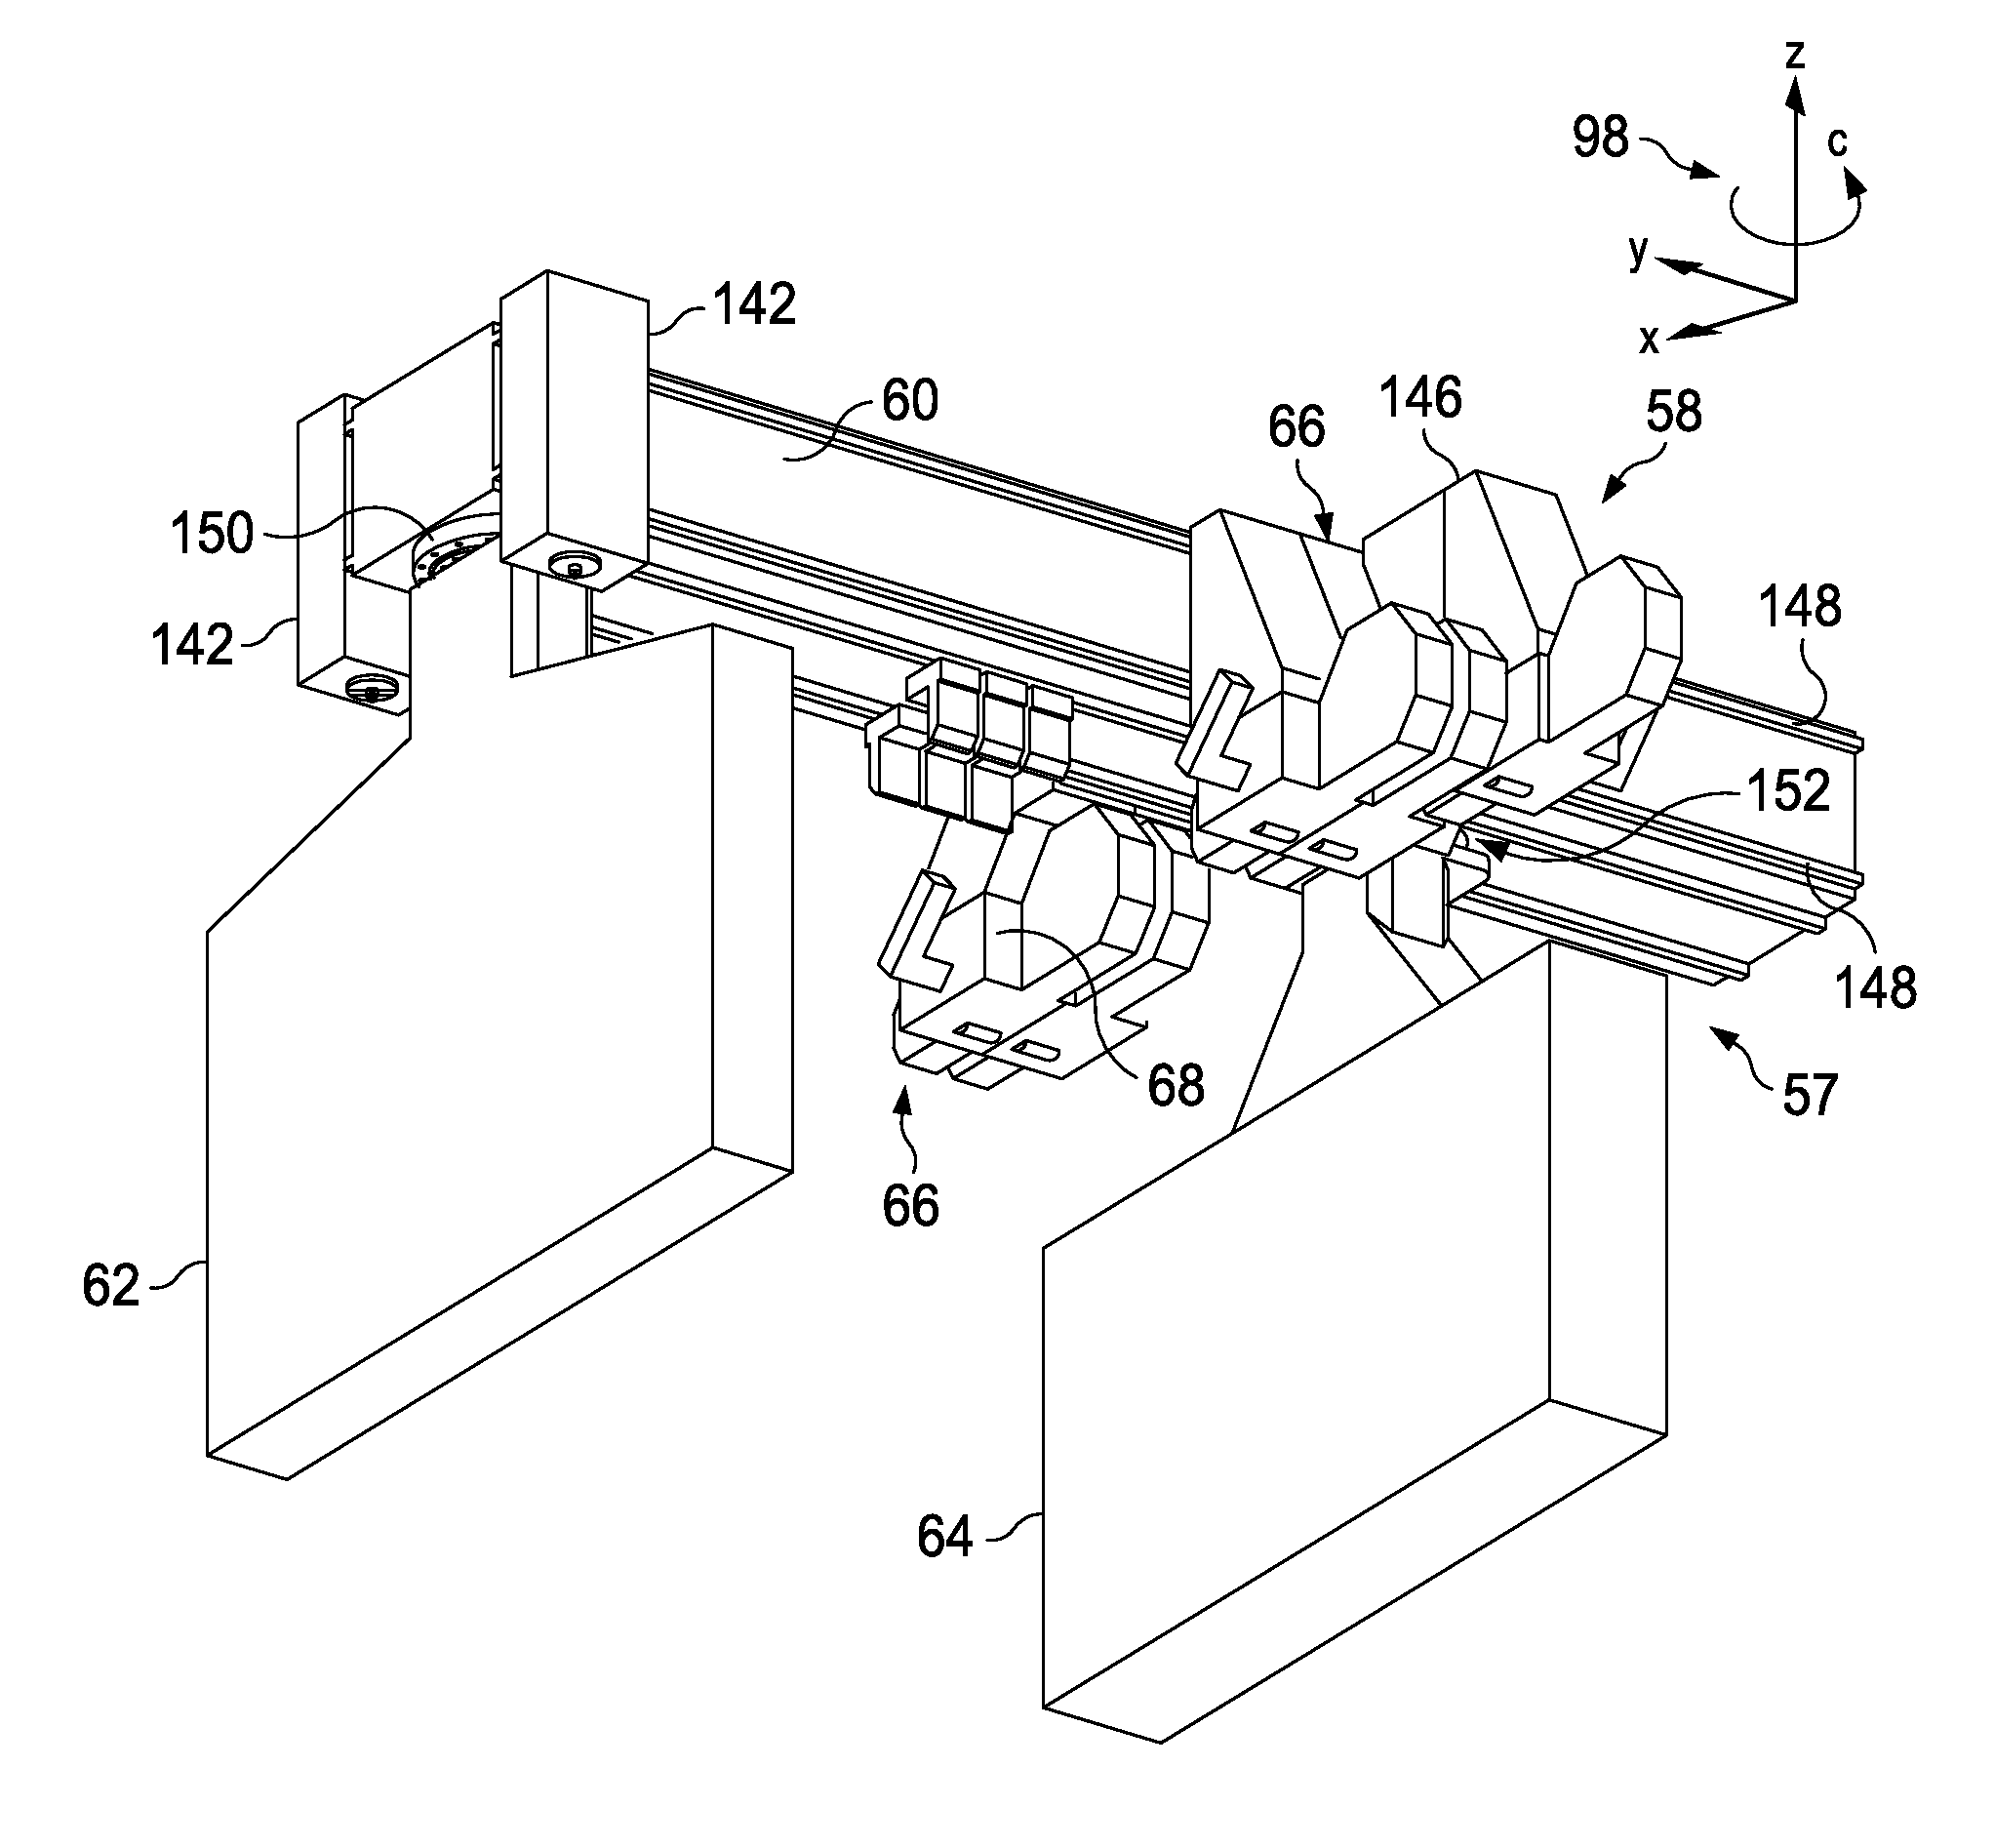 Method and Apparatus for Laminating Composites